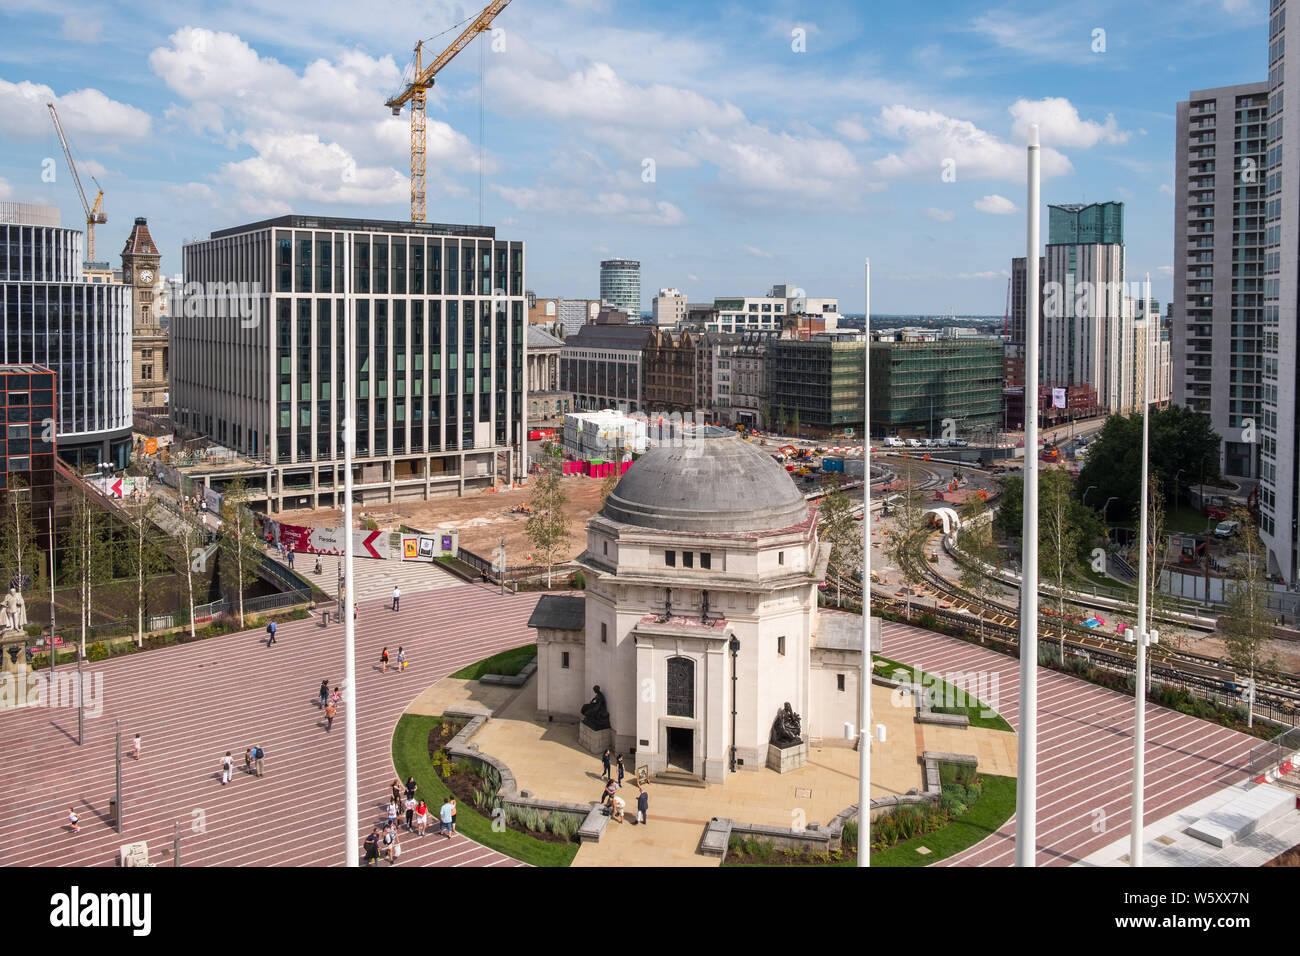 Major construction project continue in Birmingham including Paradise One,Centenary Square and Midland Metro line extension in Broad Street Stock Photo